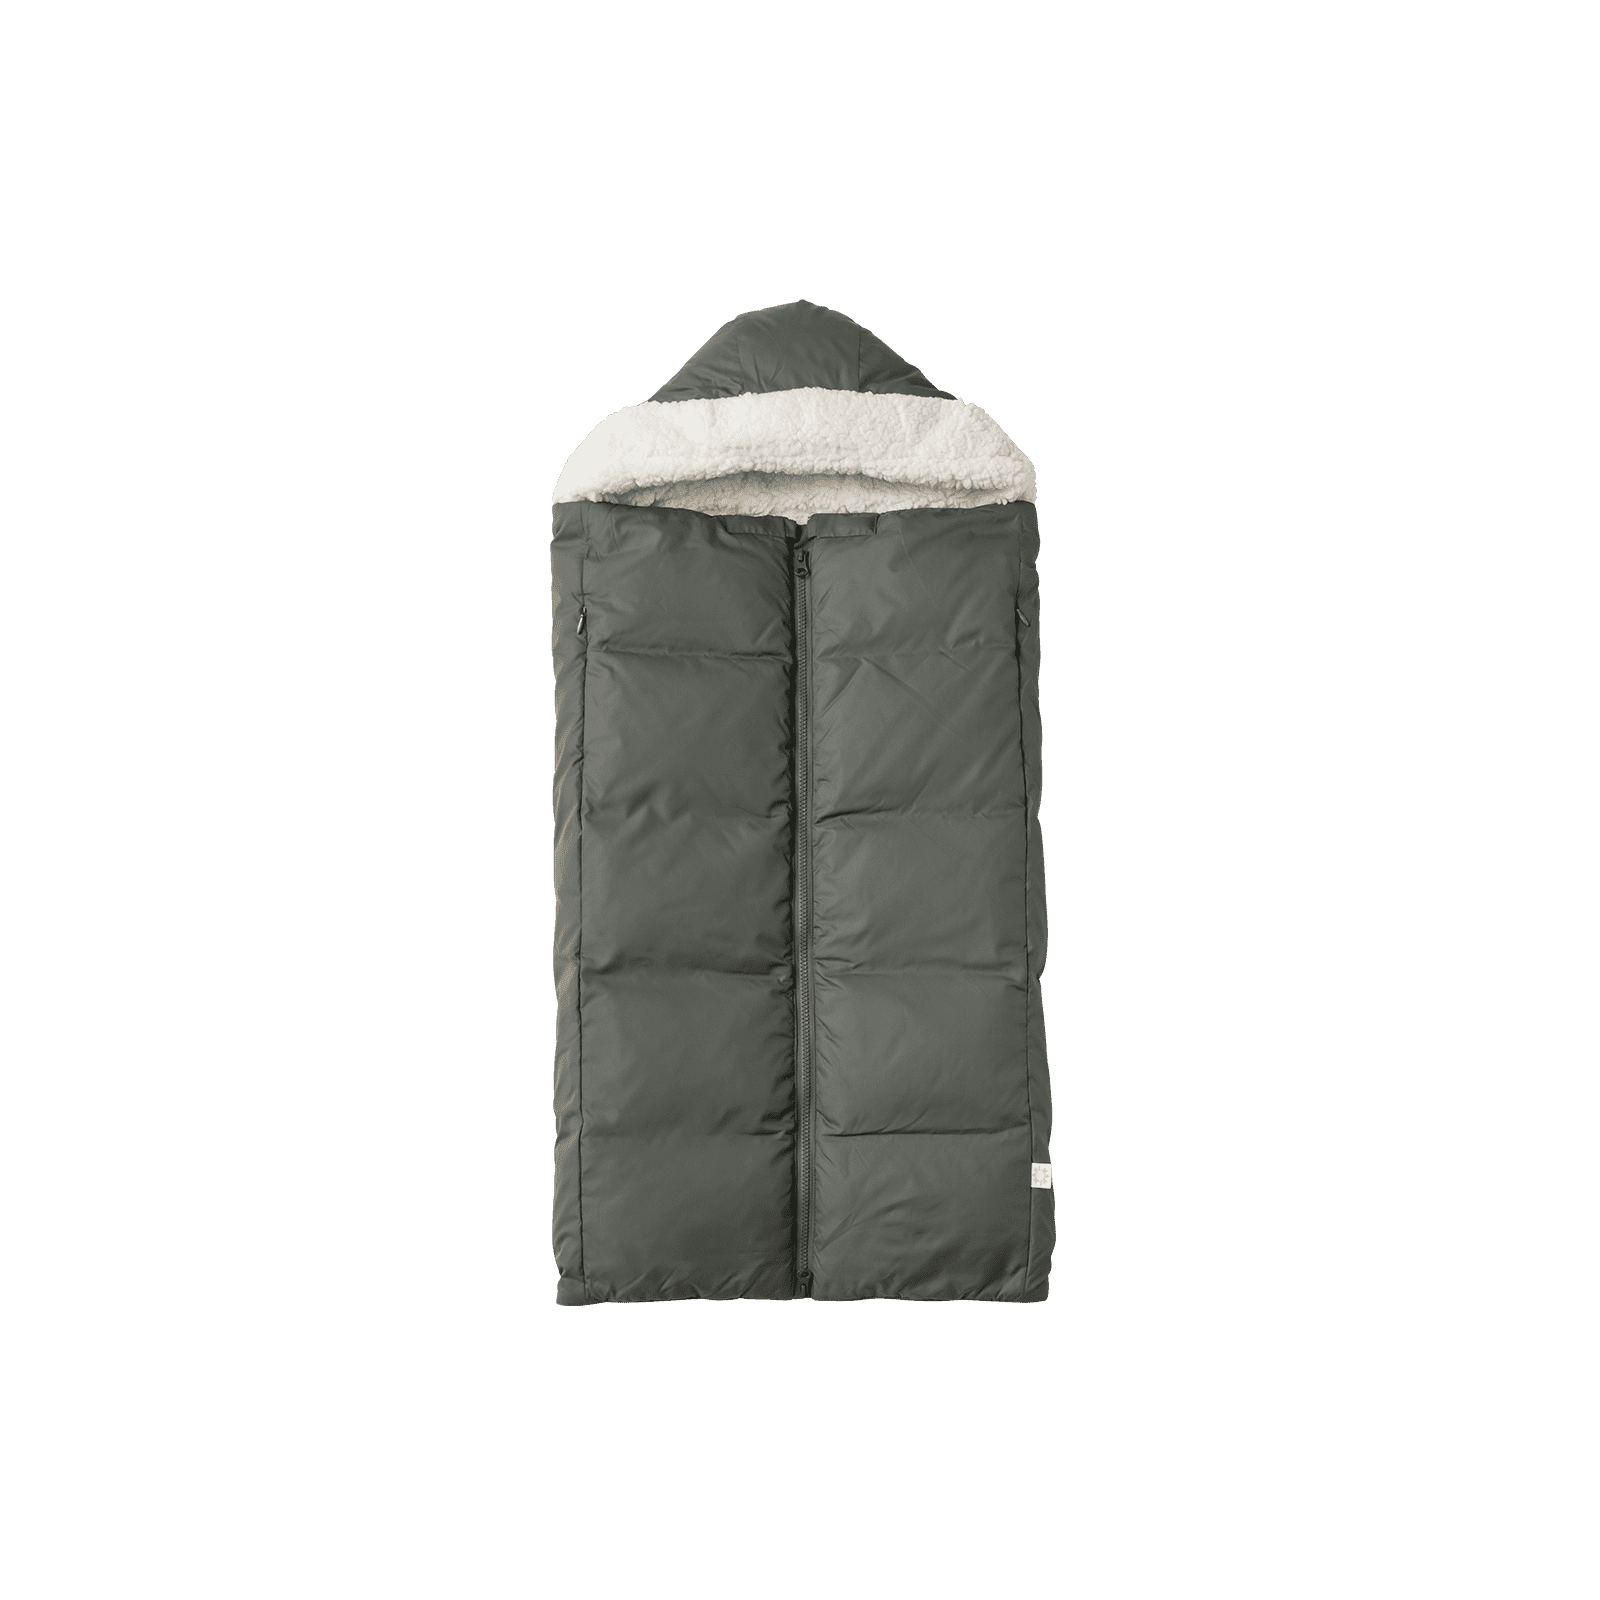 MARLMARL baby cover 3 charcoal